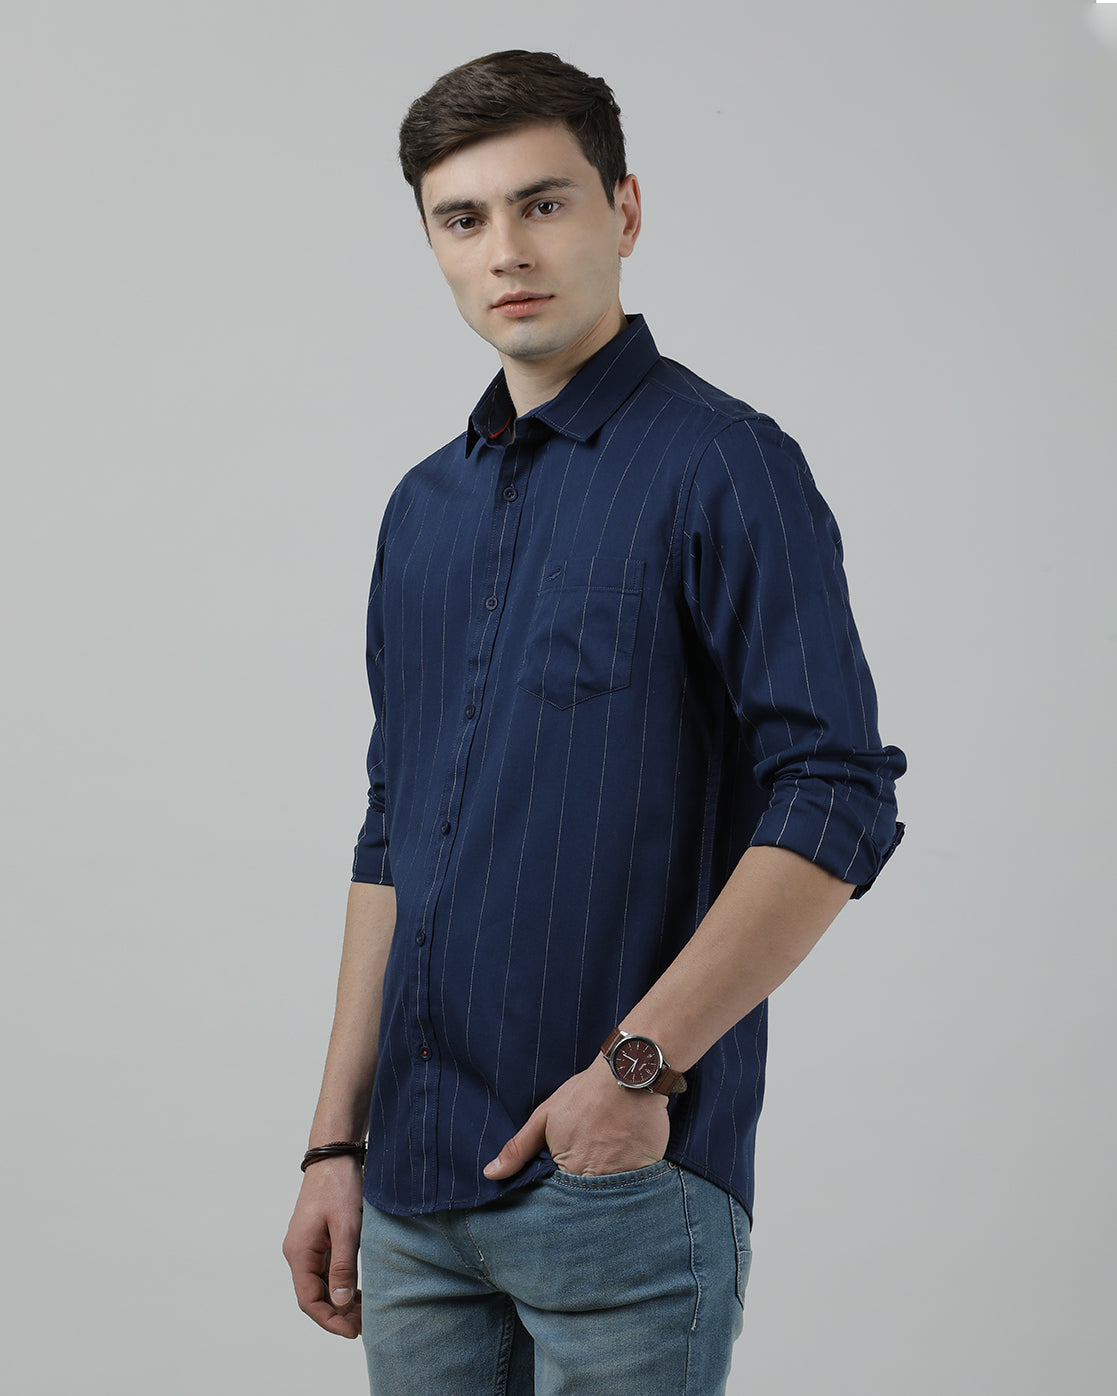 Crocodile Casual Navy Full Sleeve Slim Fit Stripe Shirt with Collar for Men